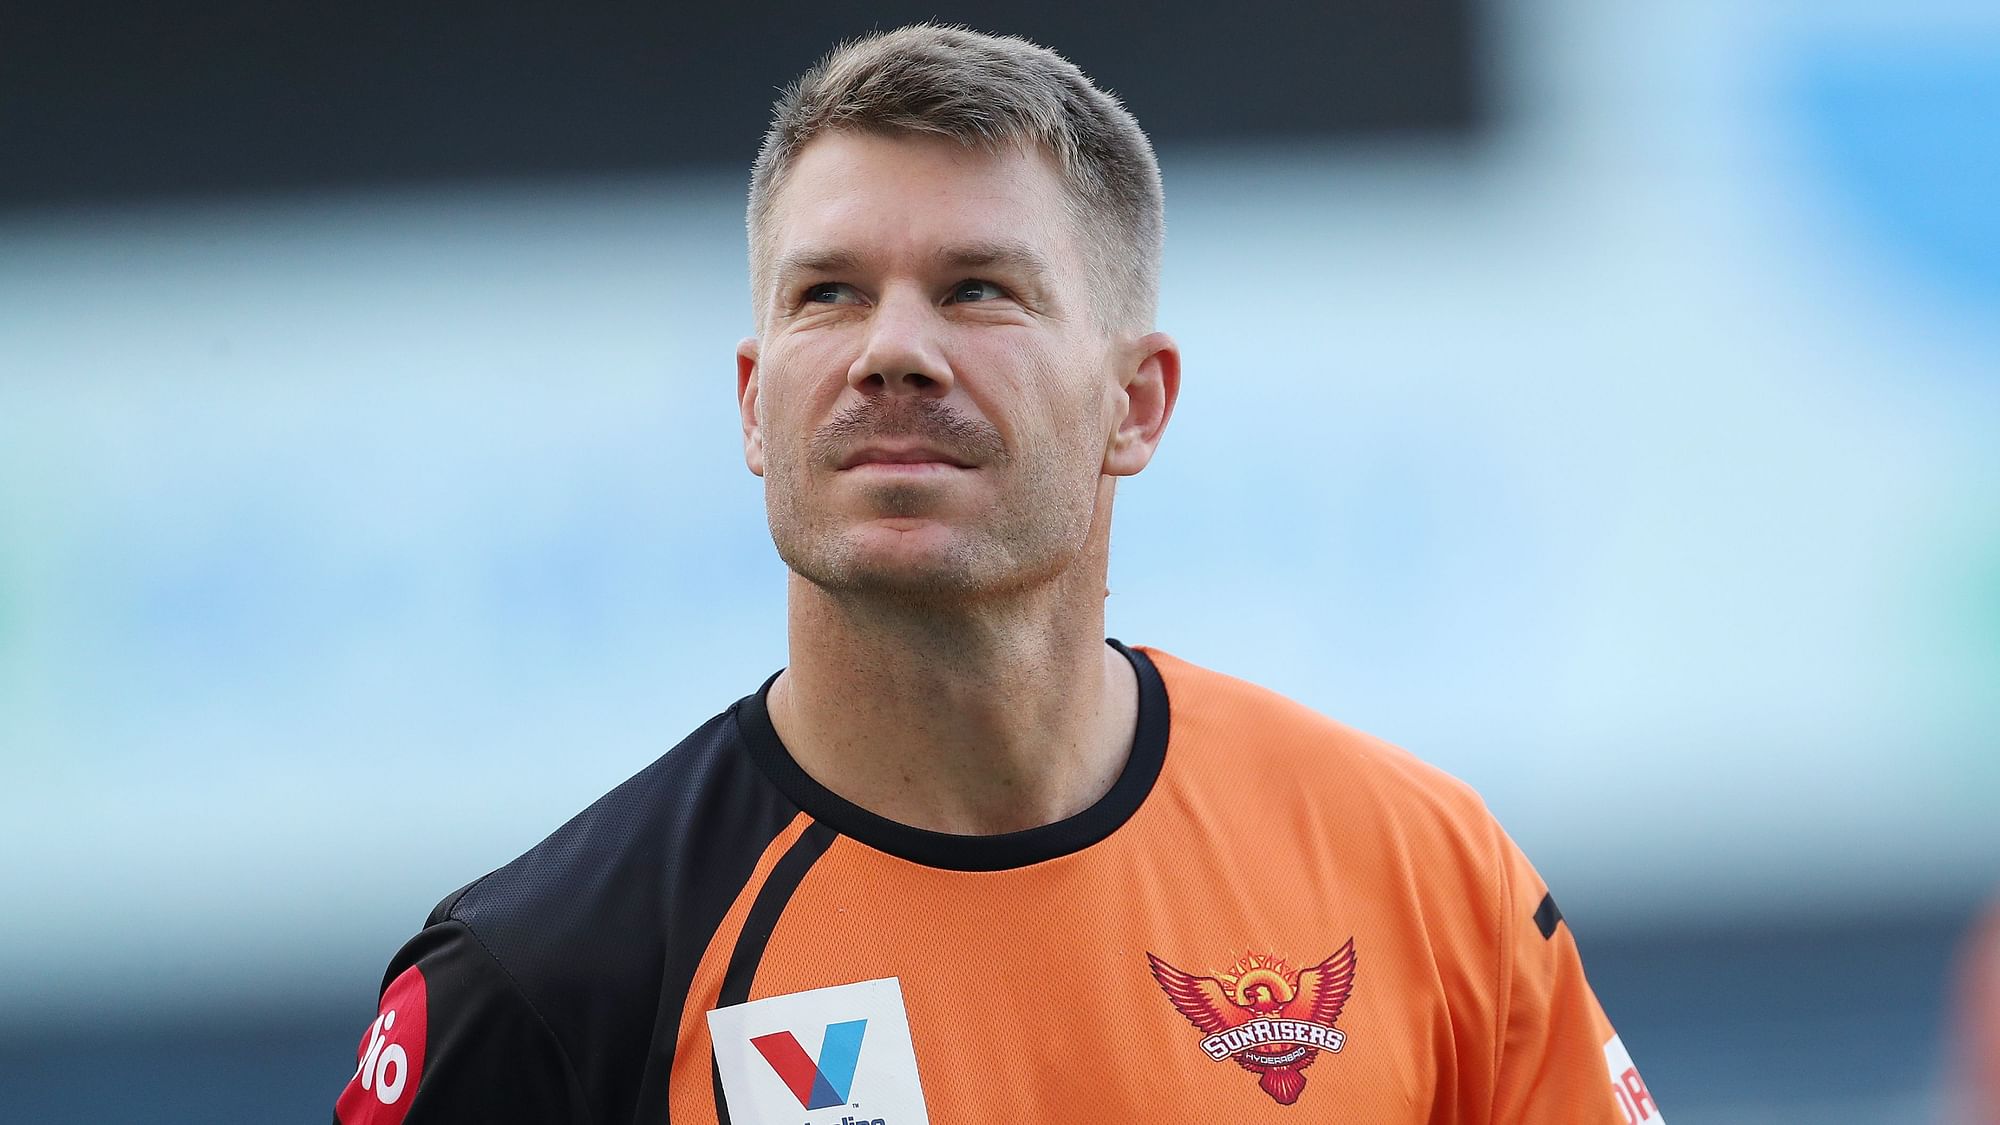 Sunrisers Hyderabad (SRH) captain David Warner commented on their 20-run loss to Chennai Super Kings.